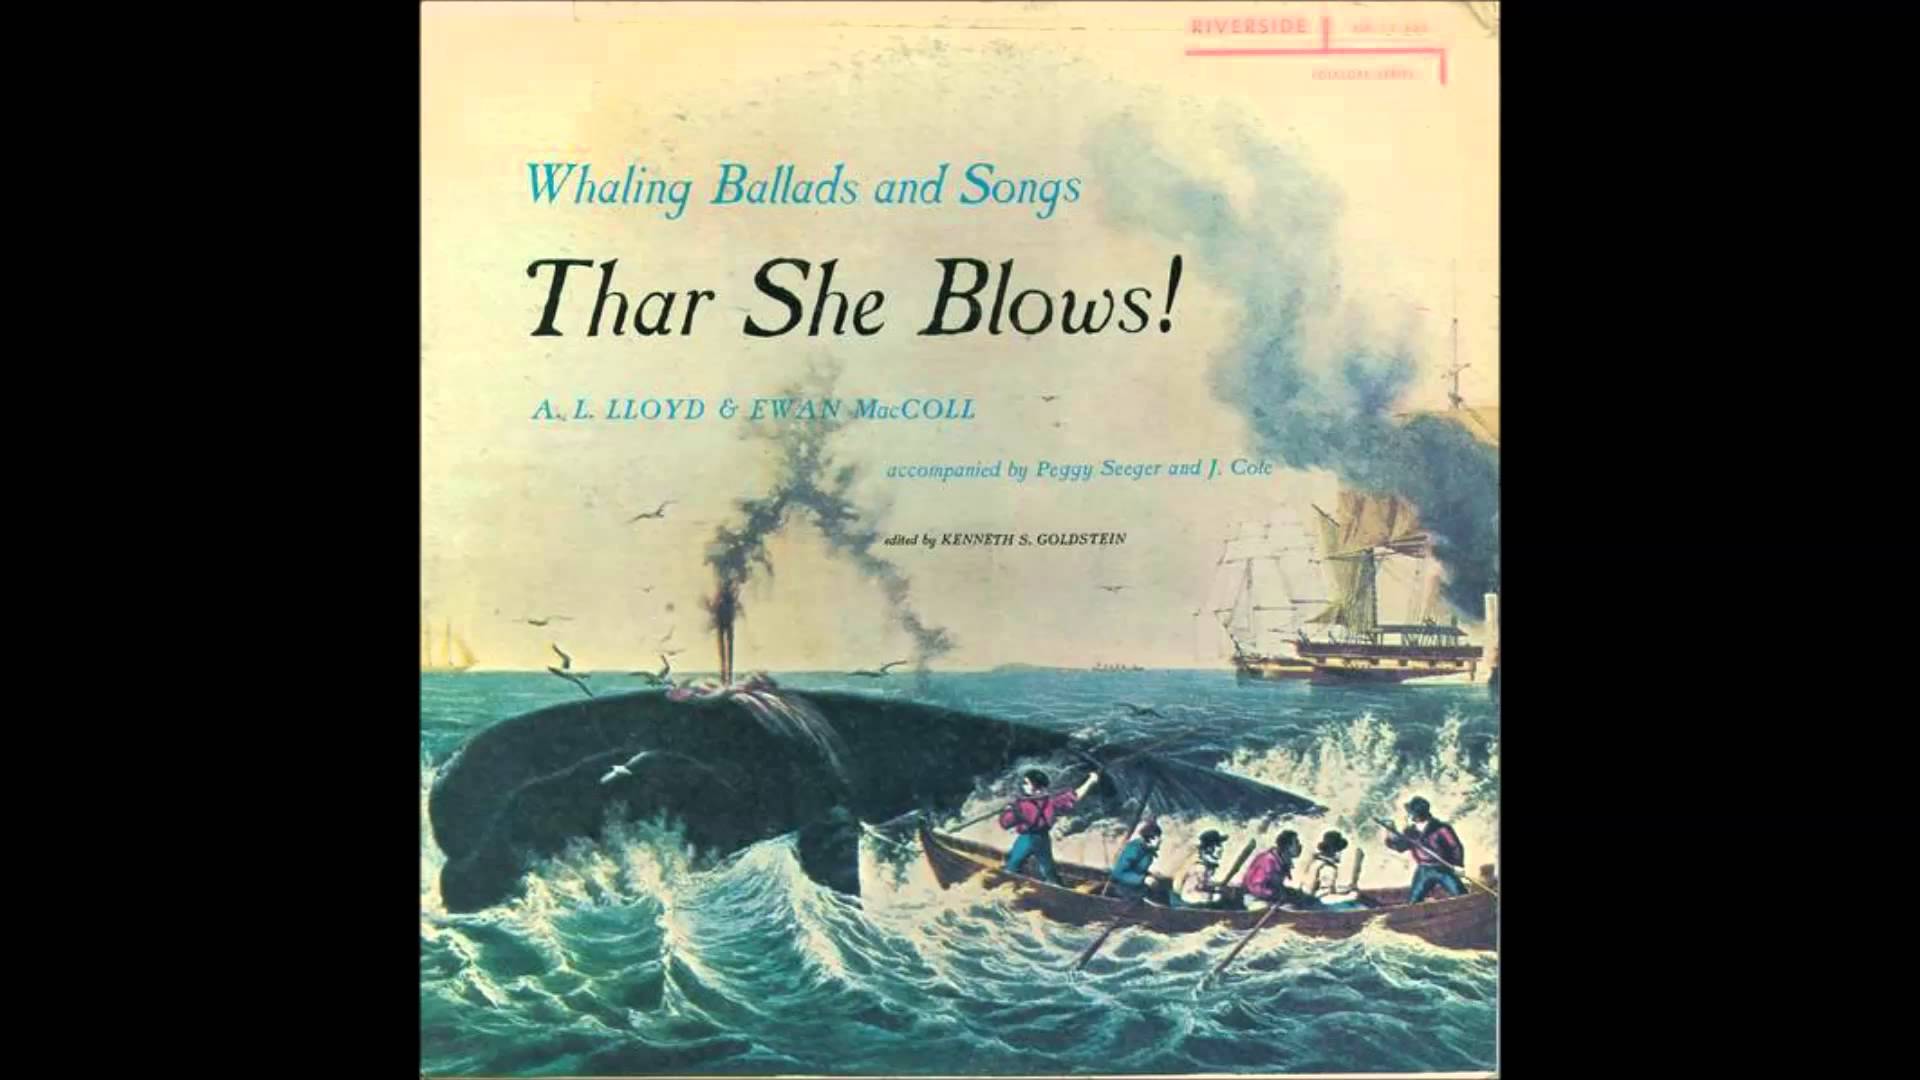 Sperm Whale Fishery - A. L. Lloyd (from Thar She Blows!) - YouTube